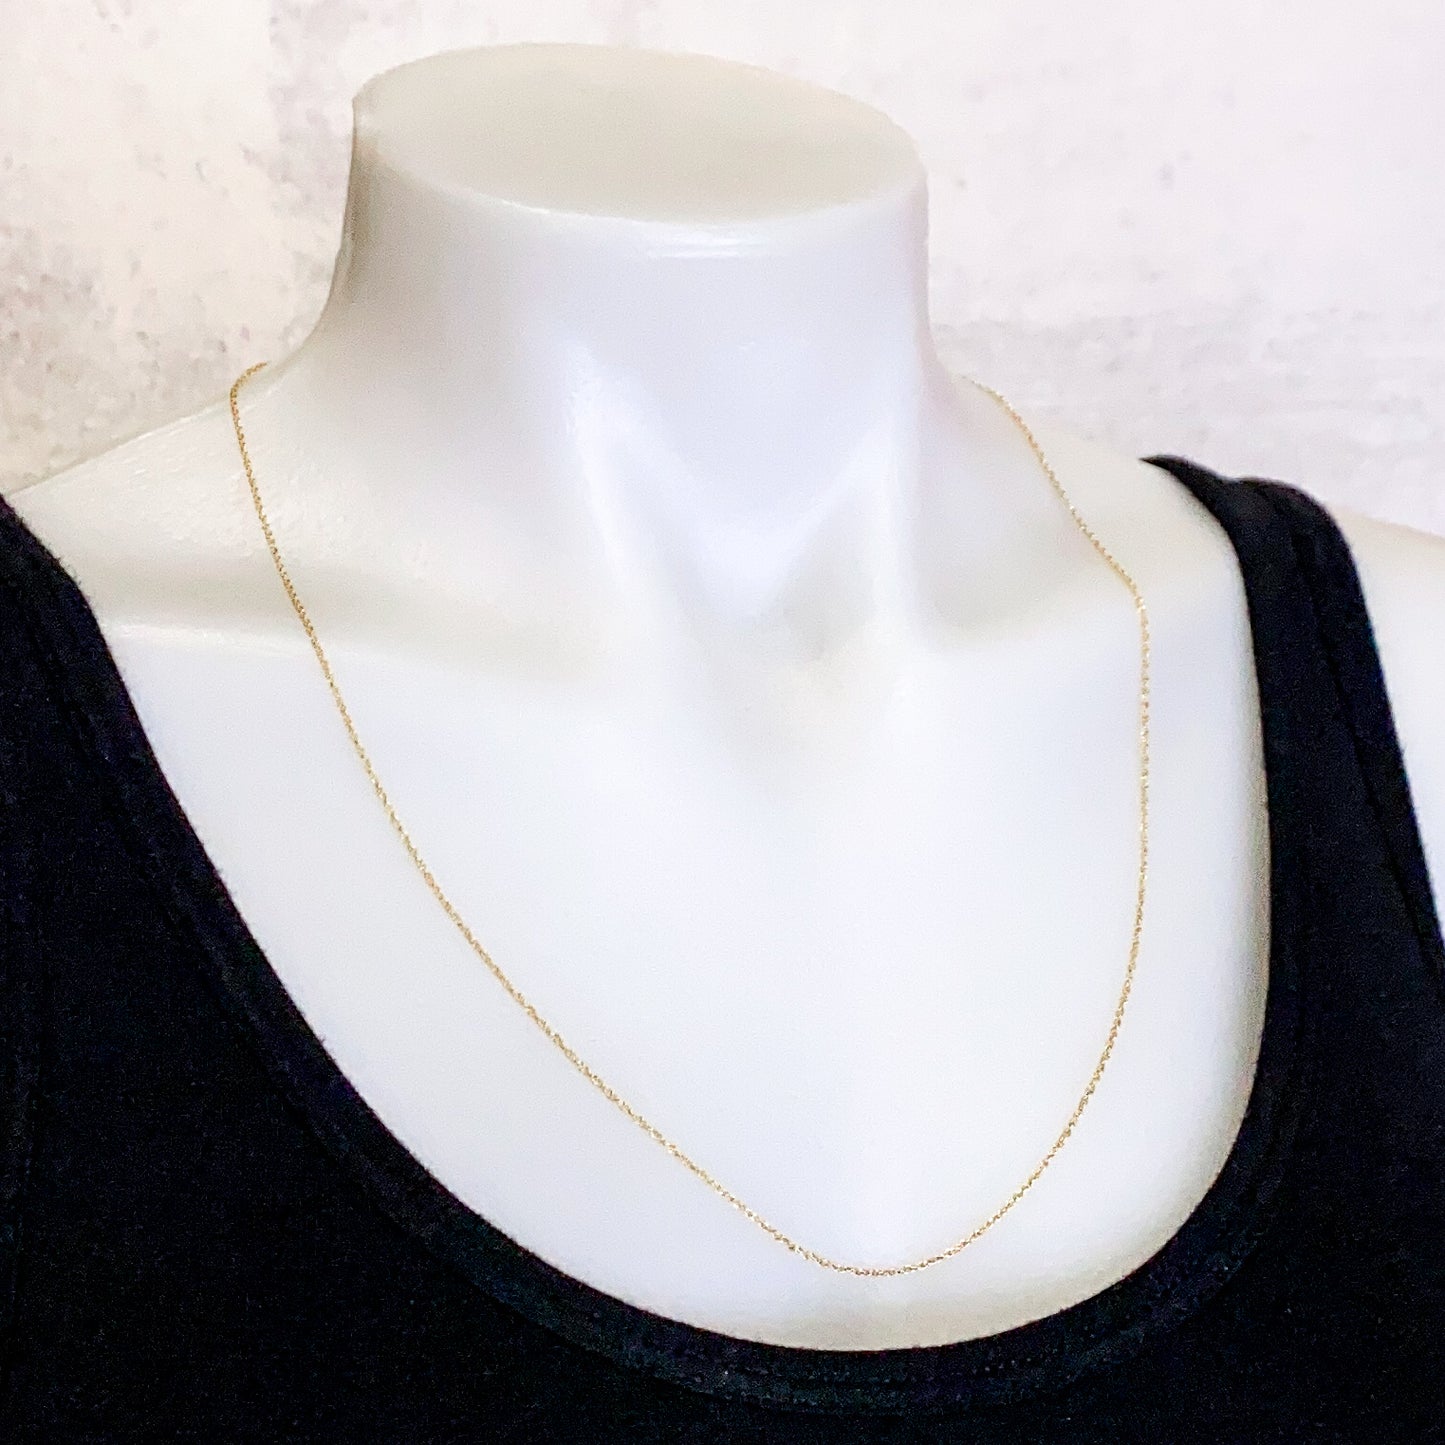 24" Fine Rope Necklace Chain (Gold Filled)